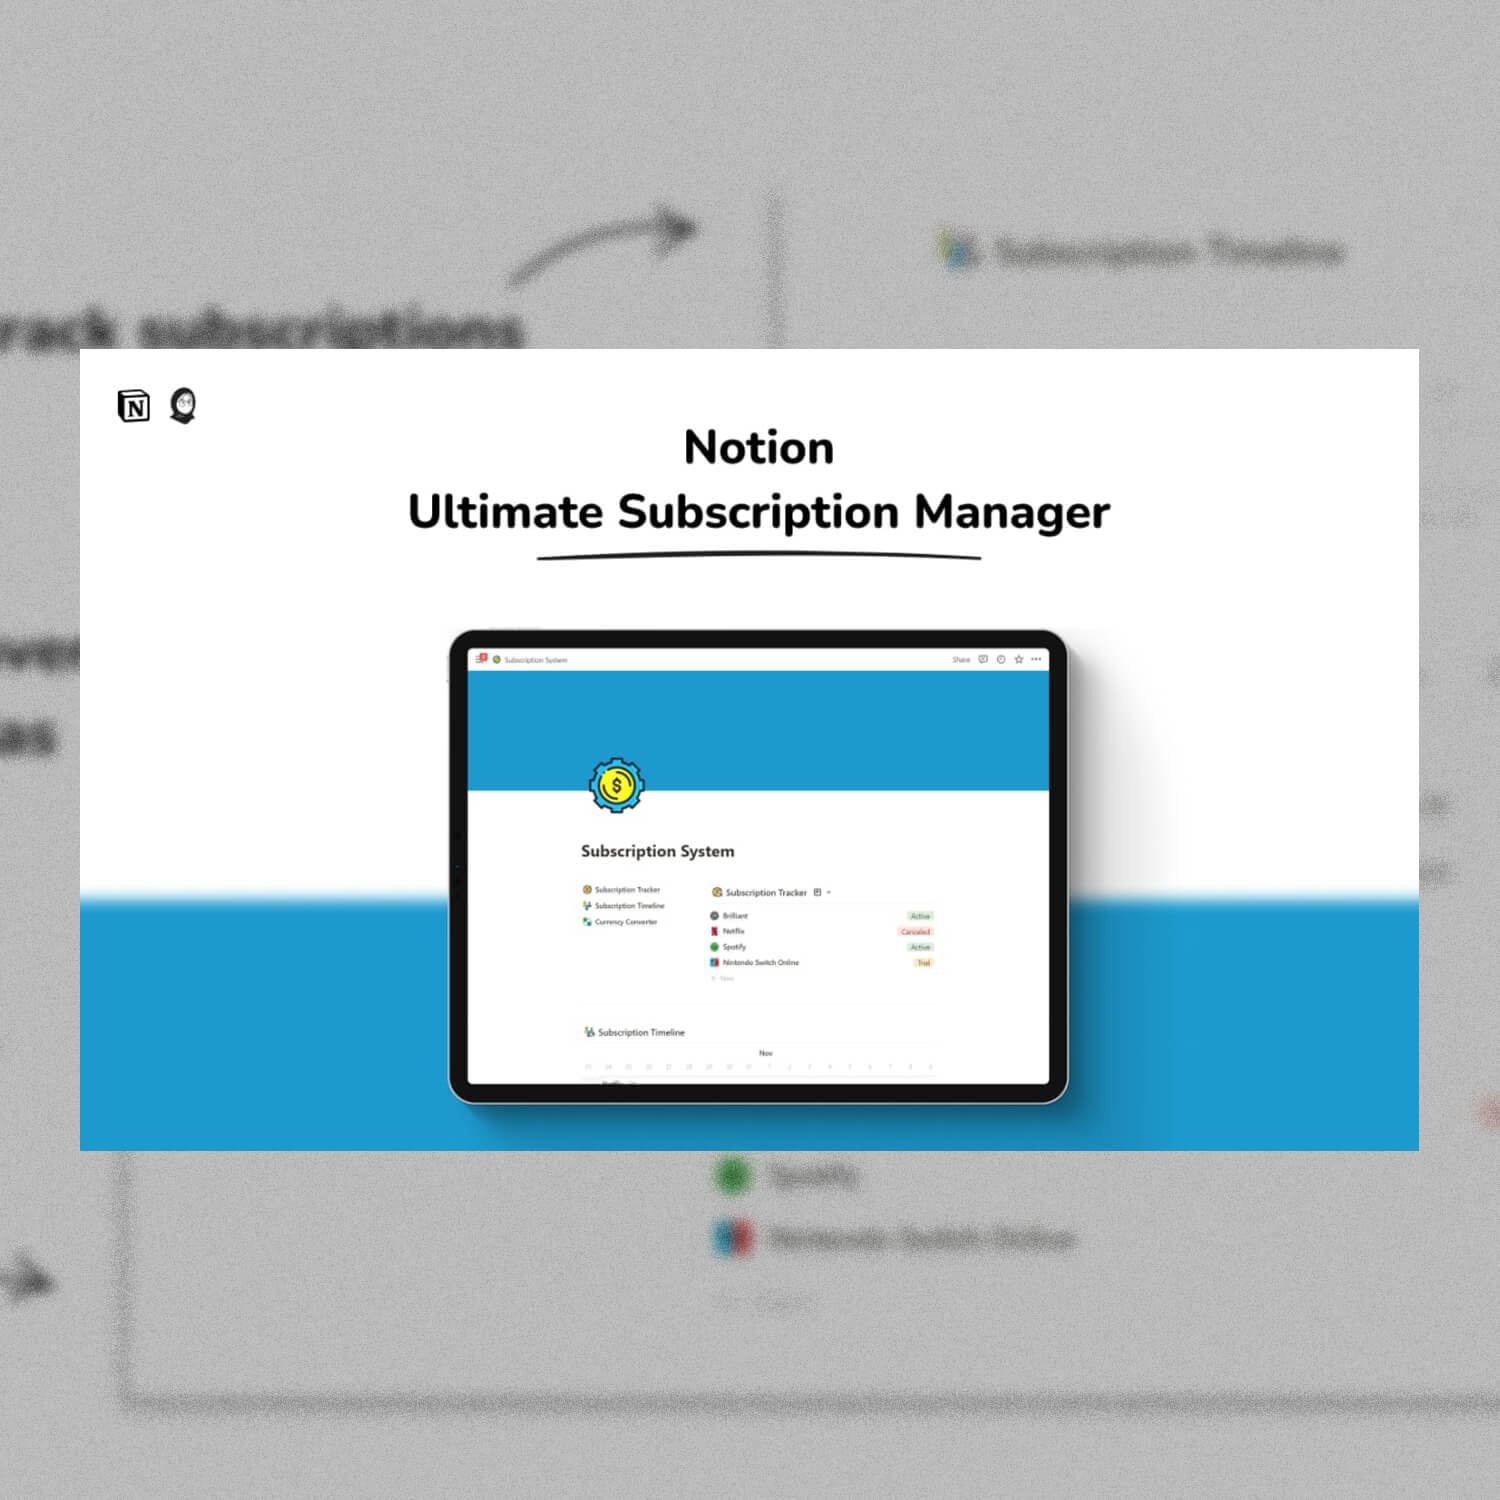 Inscription: Notion Ultimate Subscription Manager.